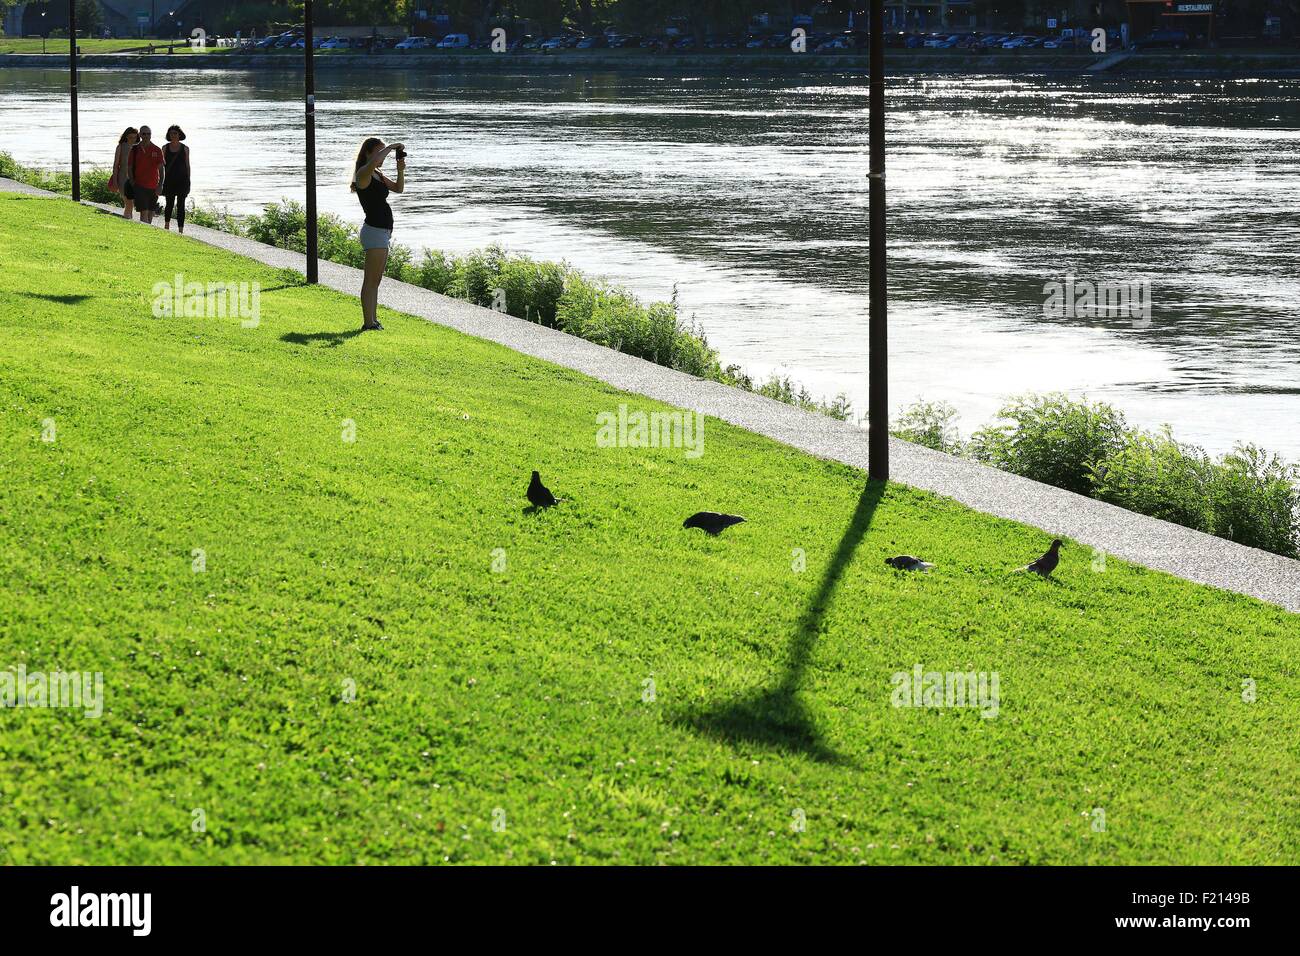 France, Vaucluse, Avignon, walkways The l'Oule, The Rhone Stock Photo